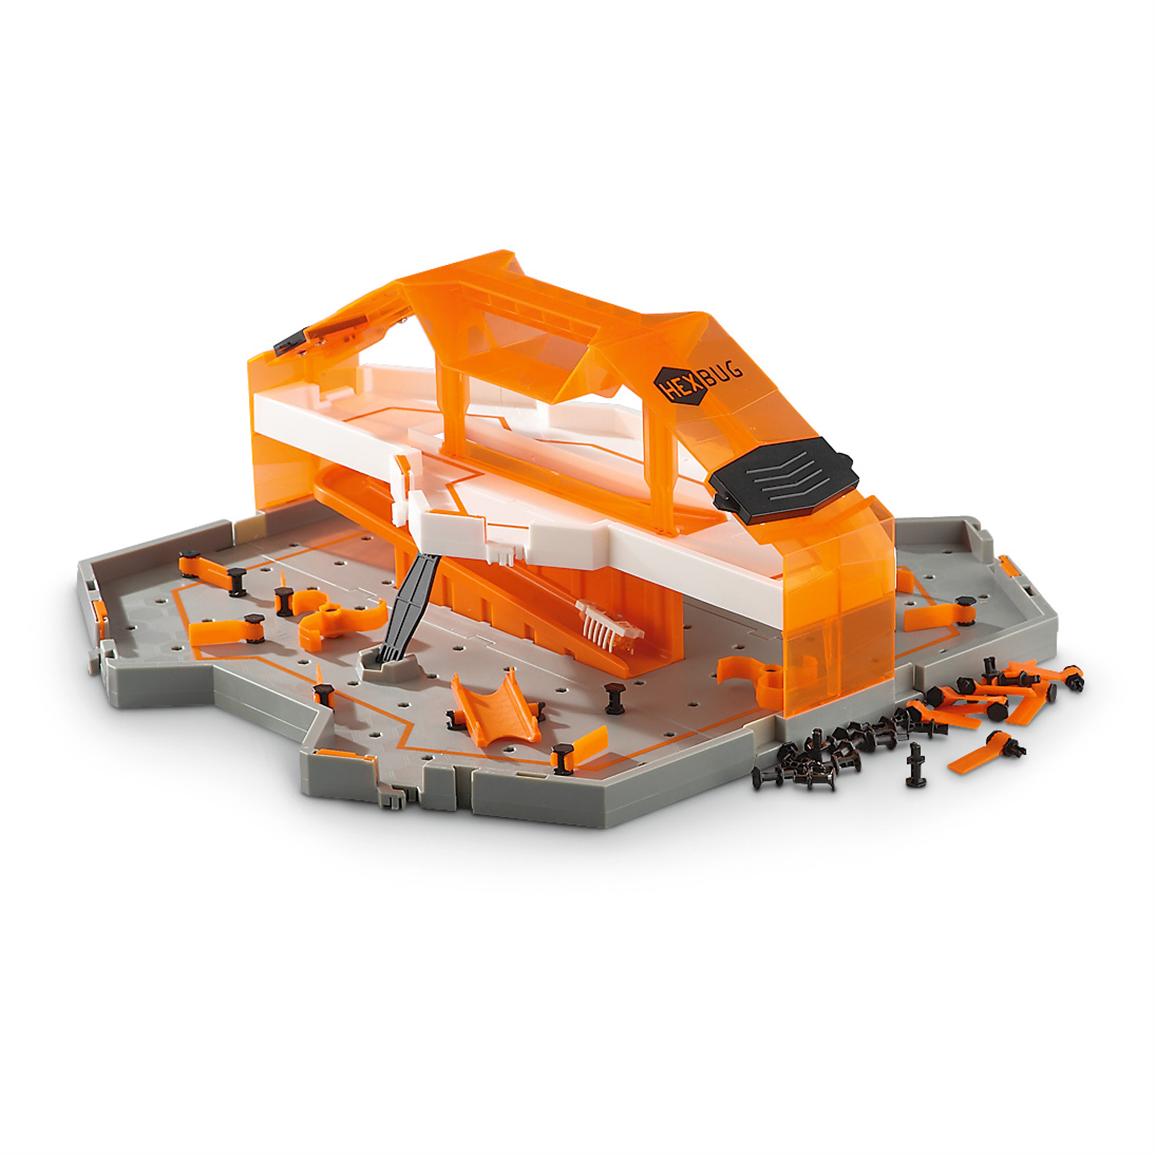 Hexbug Nano Hive Habitat Playset 11 Hexbugs 2 Weapons Carrying Case Extensions for sale online 